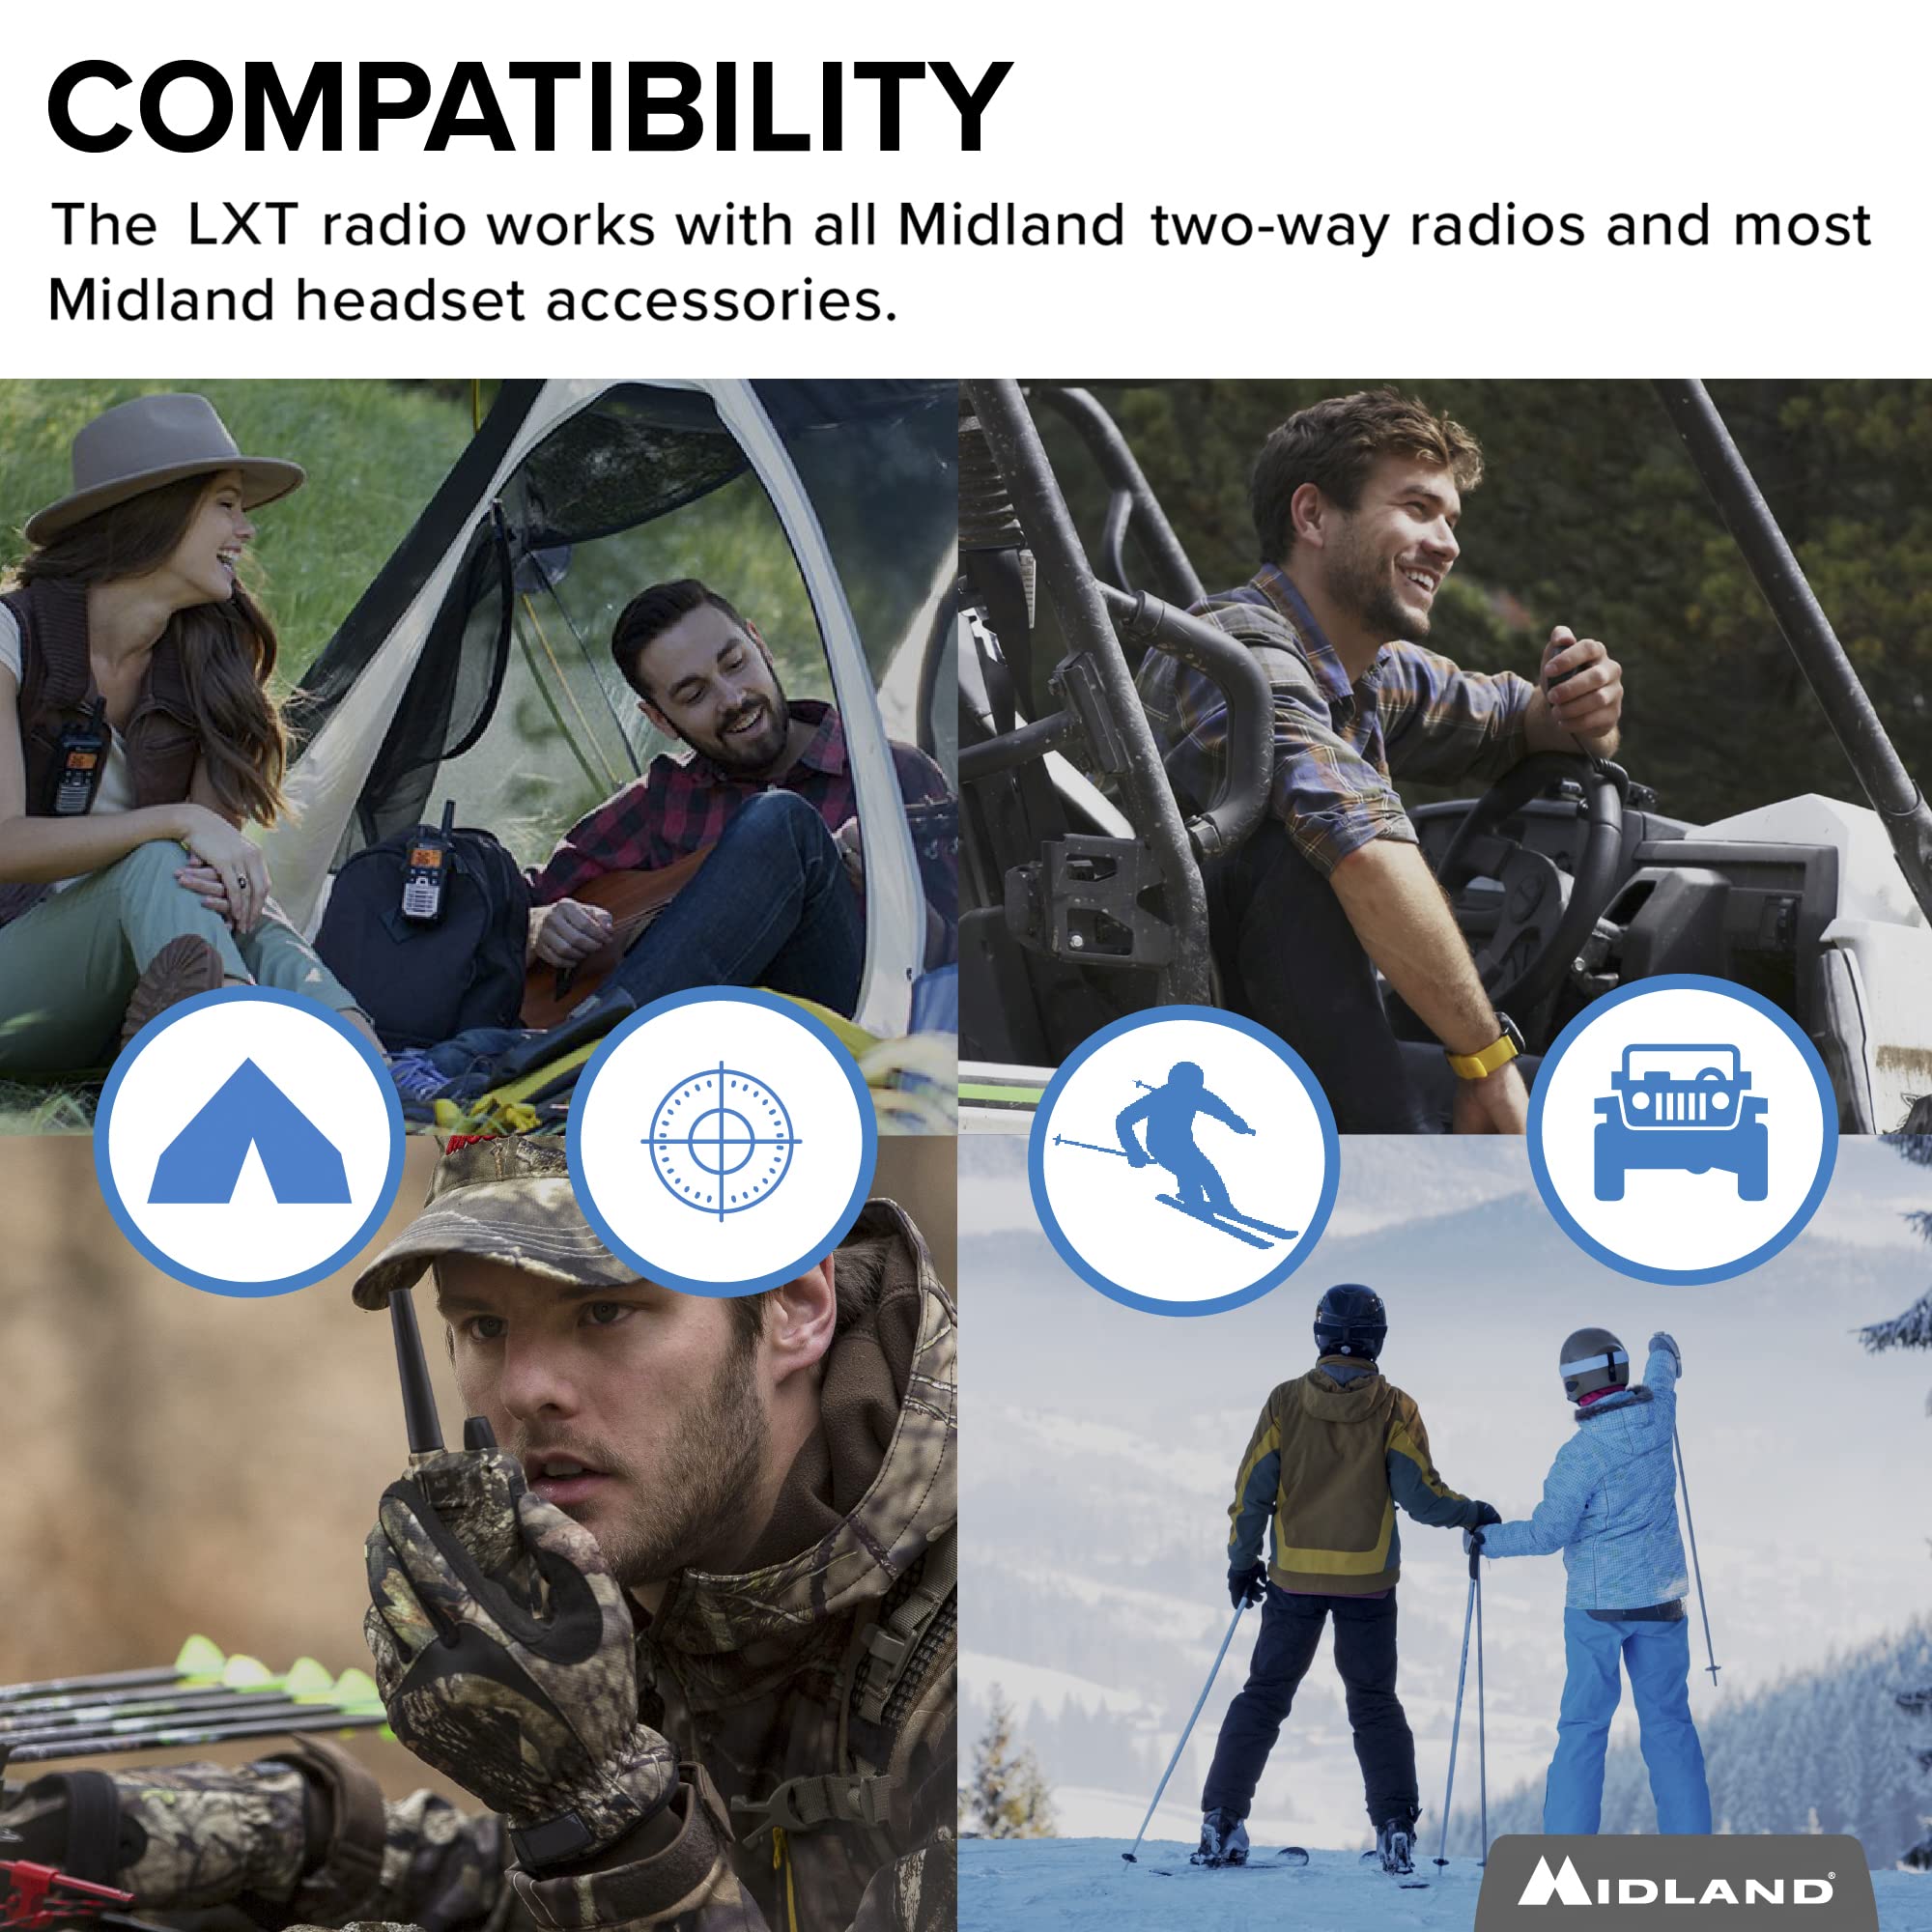 Midland 22 Channel FRS Walkie Talkies with Channel Scan - Long Range Two Way Radios, Silent Operation, Batteries Included (Mossy Oak Camo, 2-Pack)